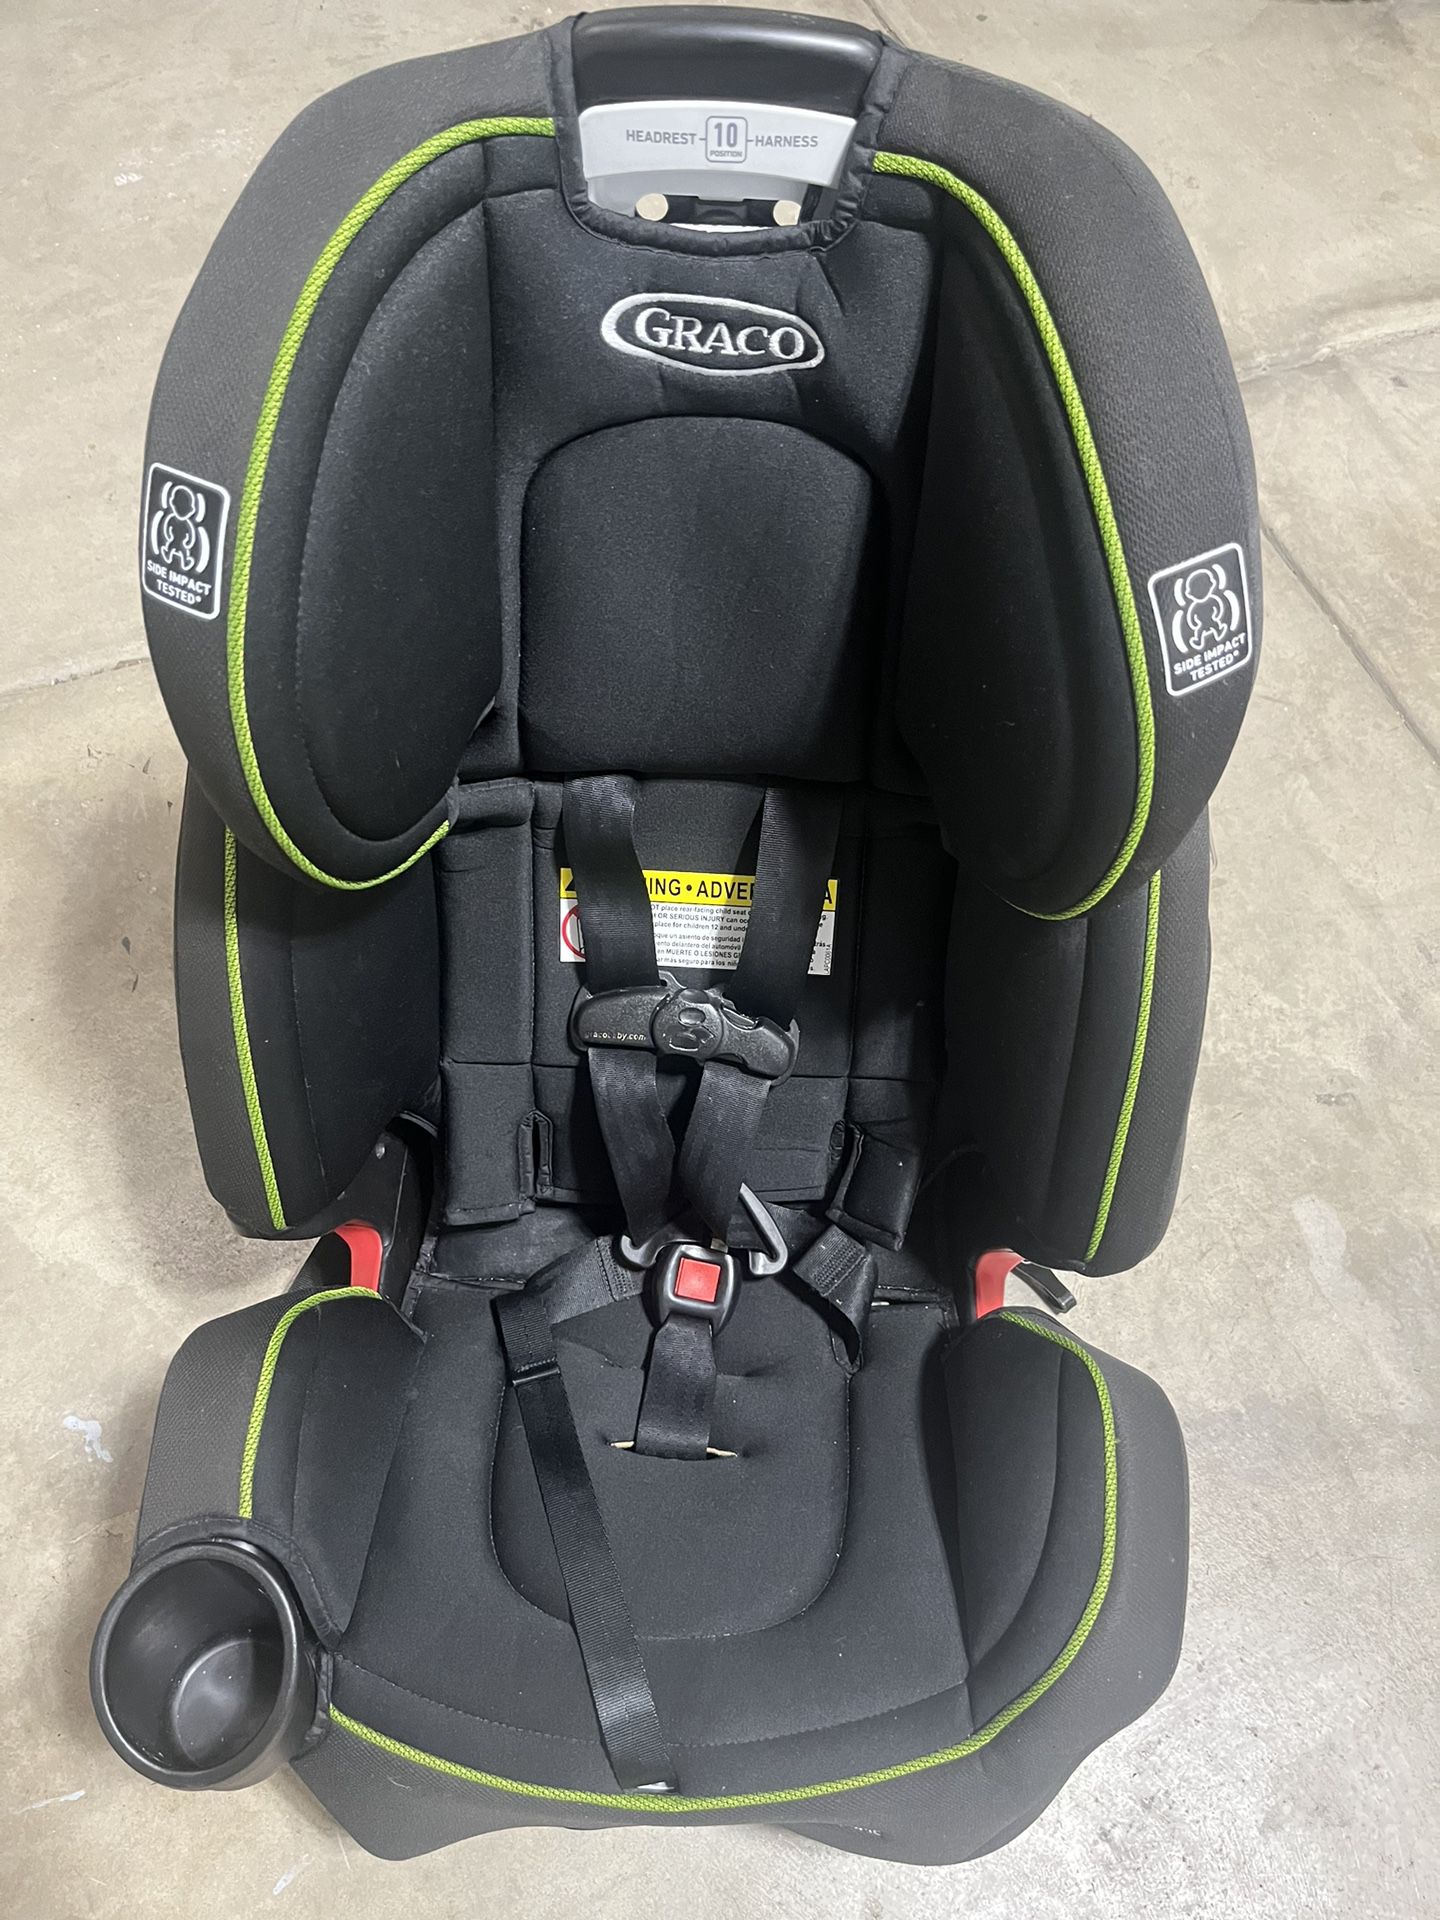 Graco Grows4me Baby Car Seat